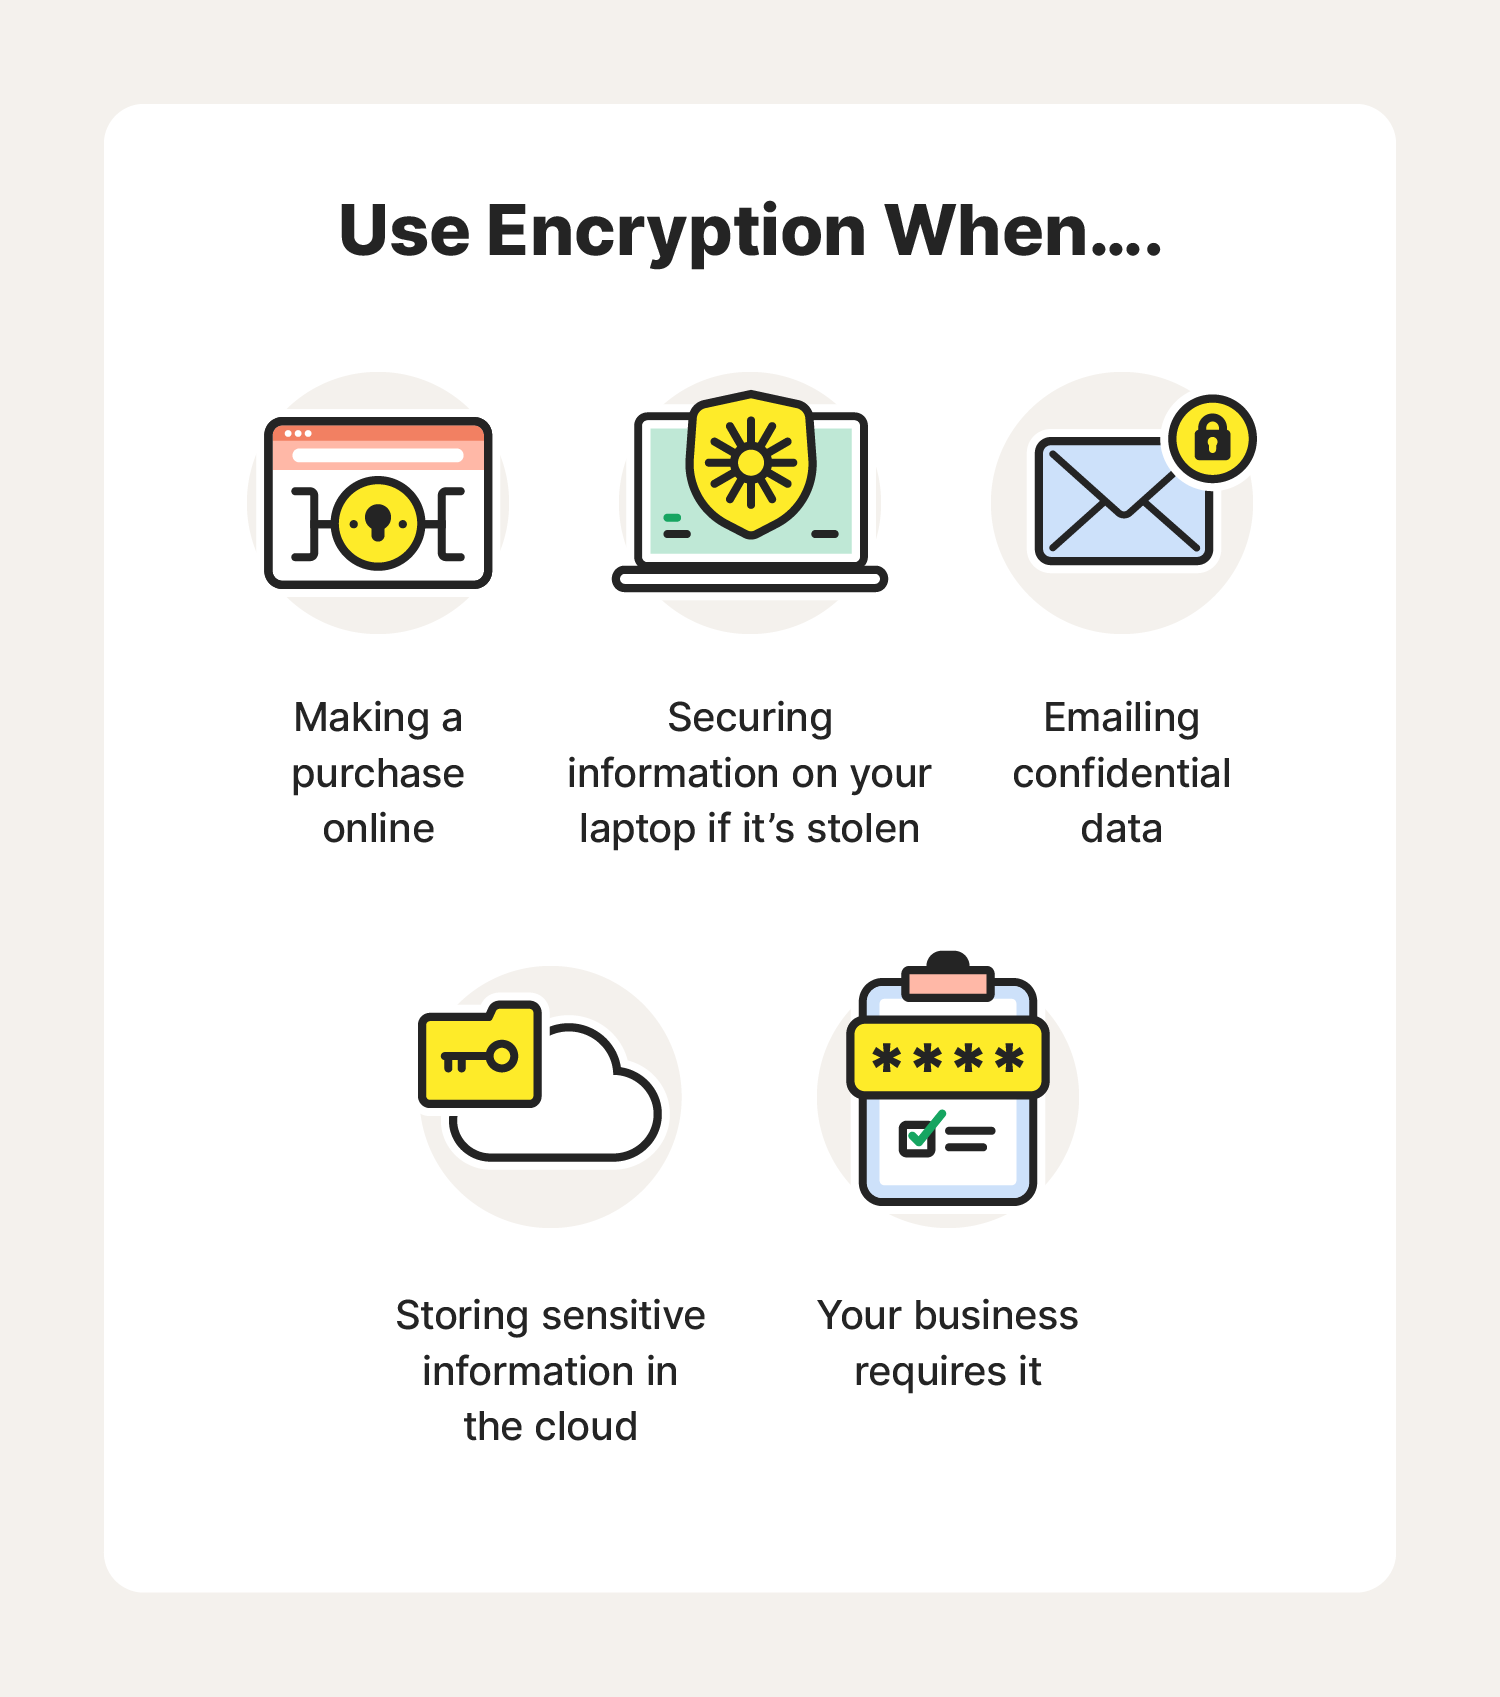  A graphic showcases when encryption is used, further answering the question, "What is encryption?"